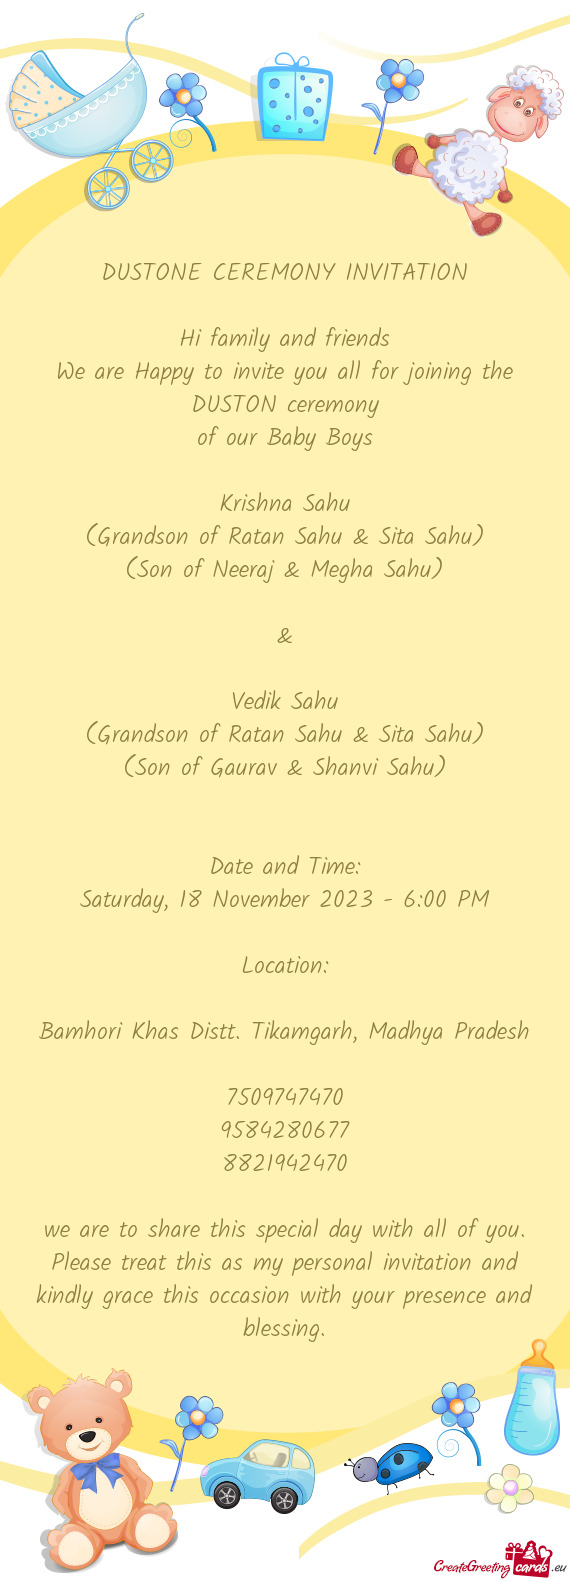 We are Happy to invite you all for joining the DUSTON ceremony